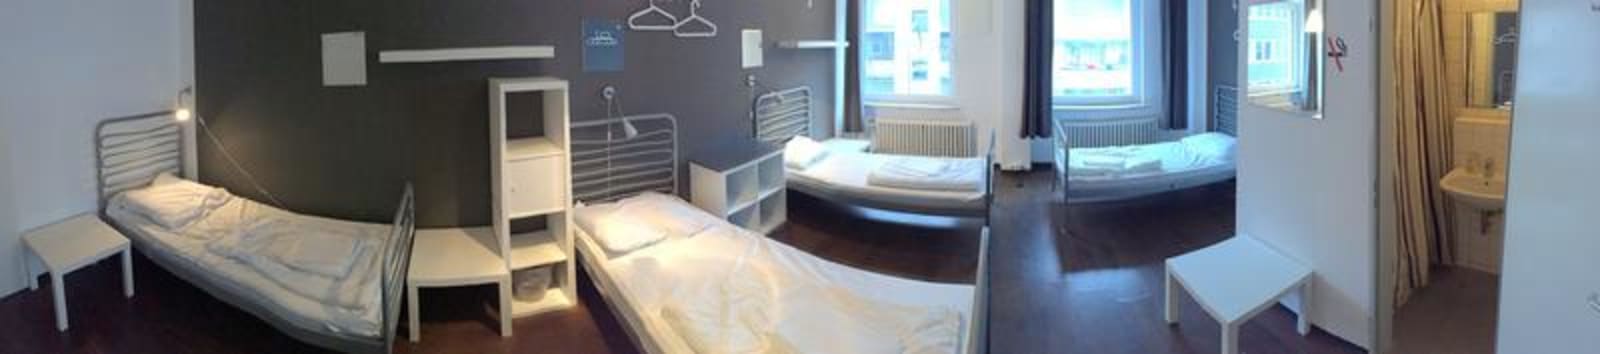 Station - Hostel for Backpackers, Cologne